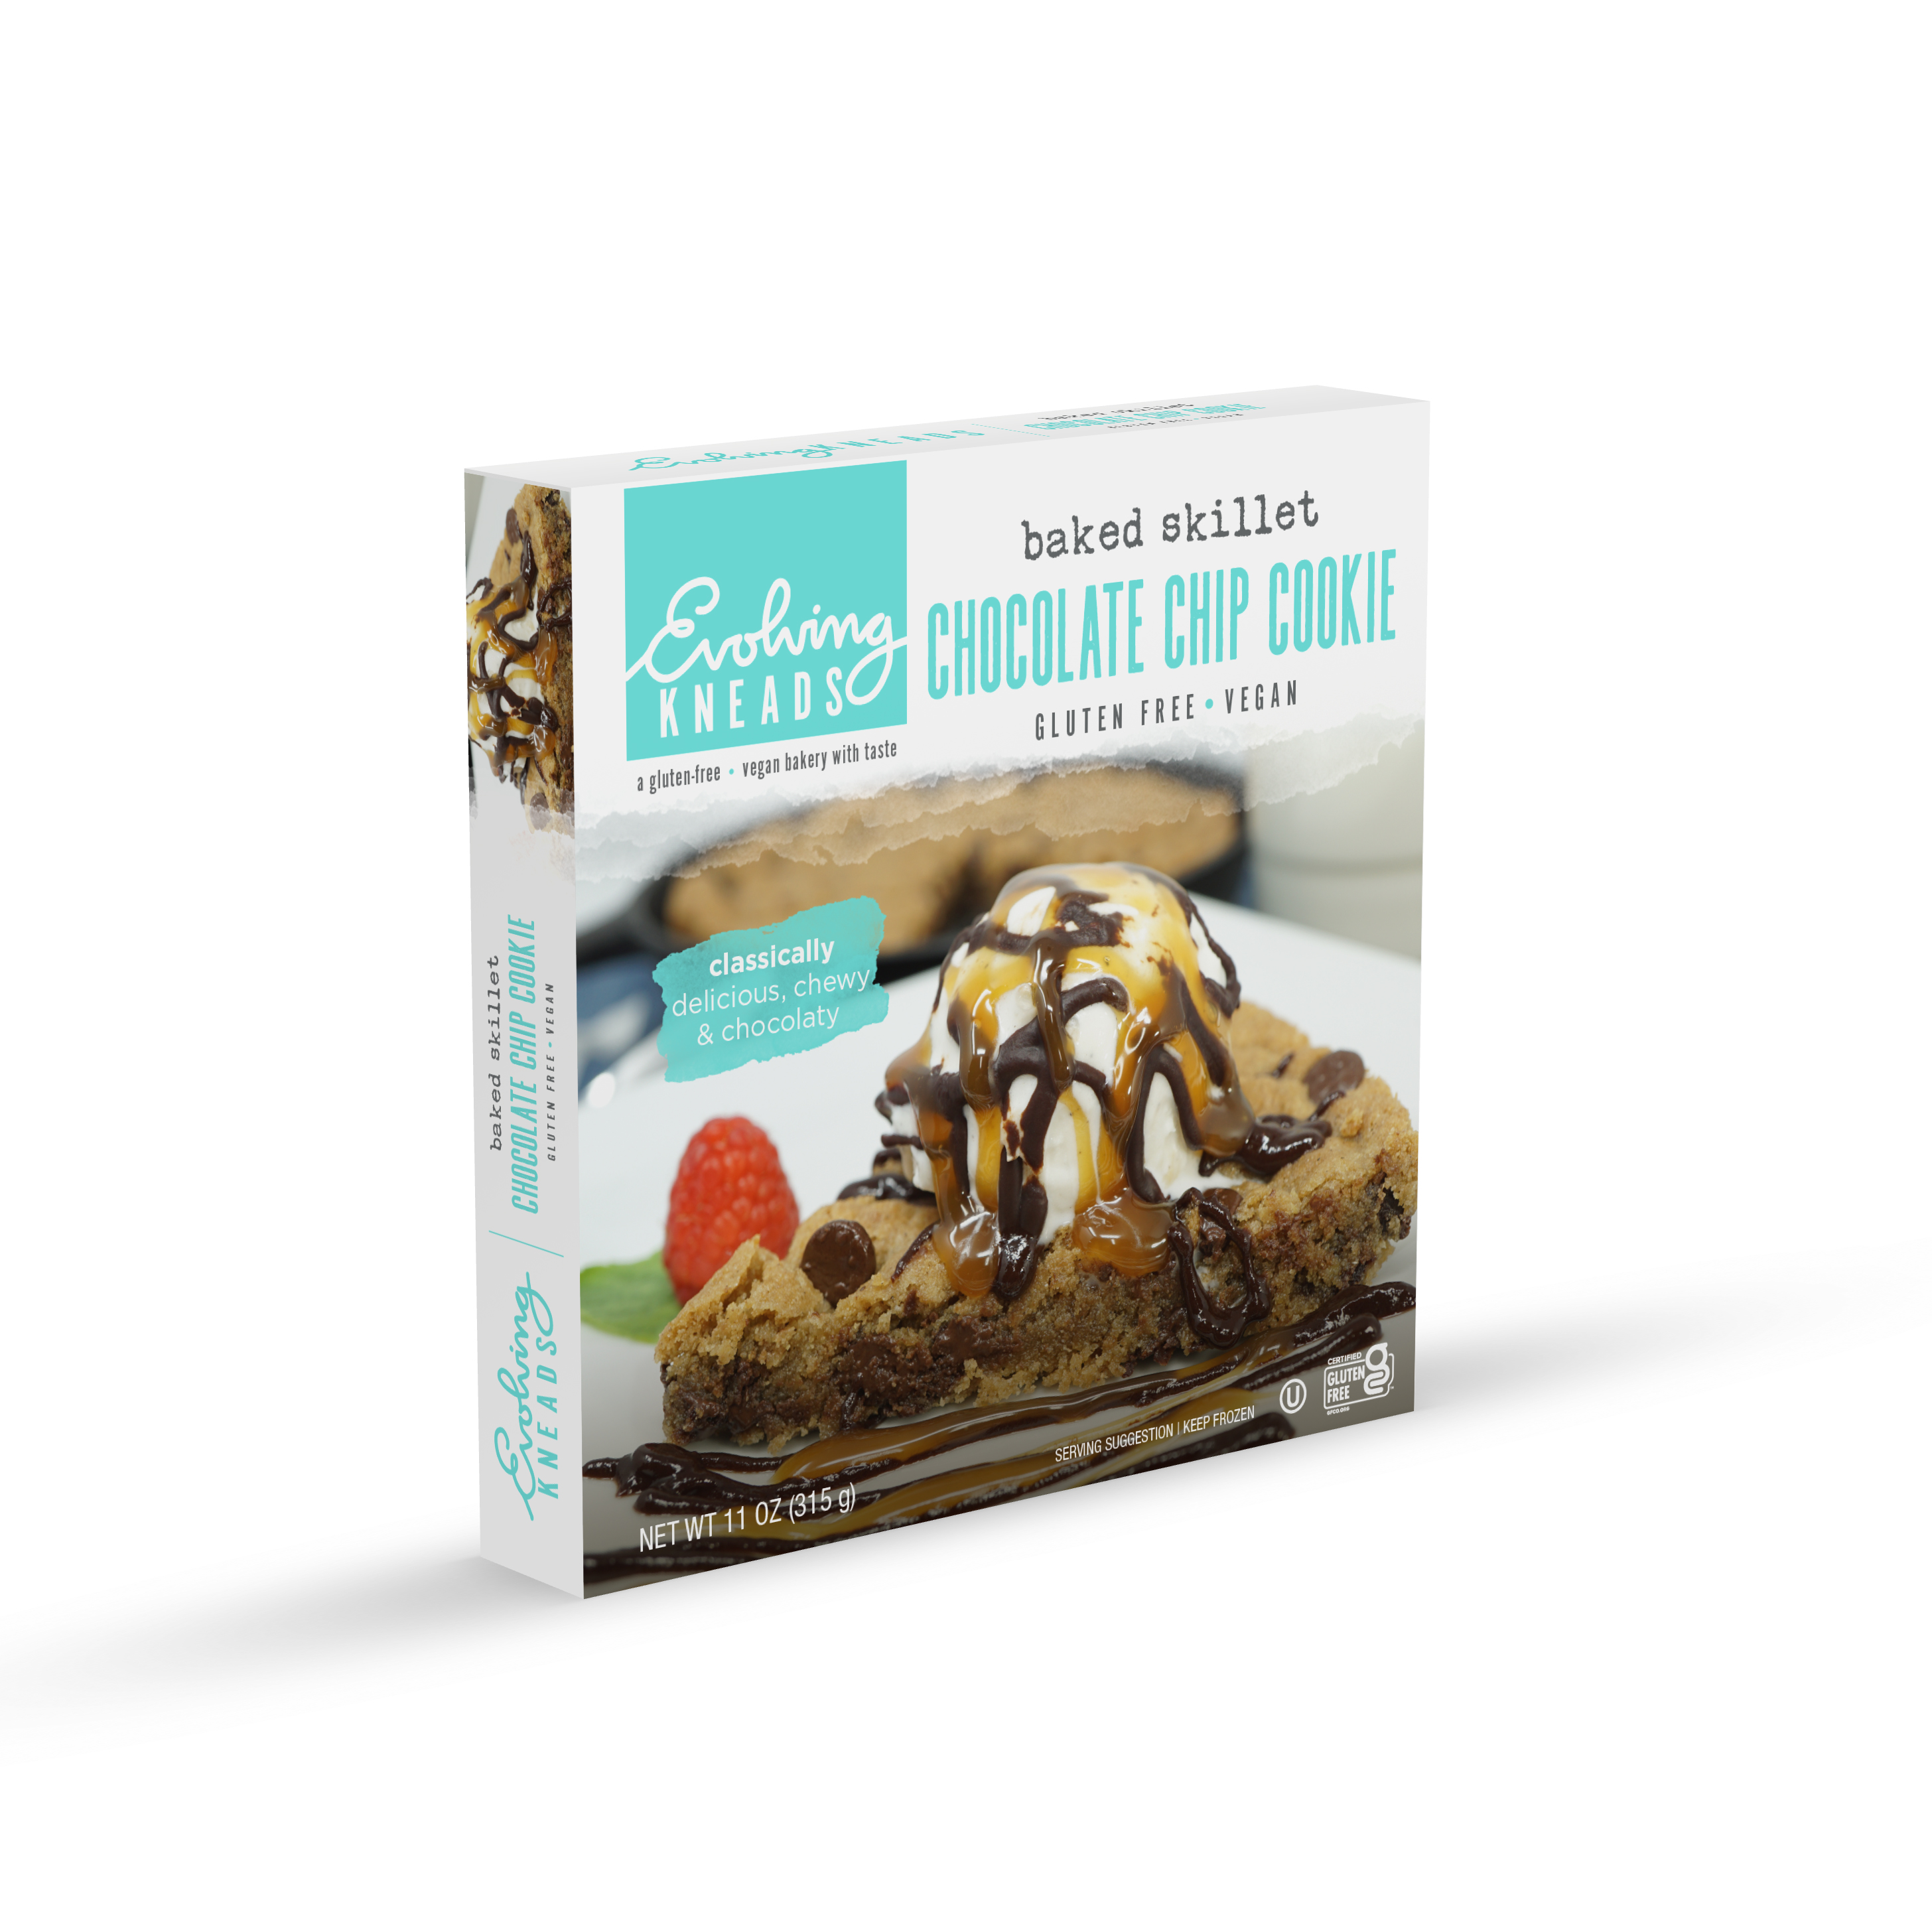 Evolving Kneads GFV Chocolate Chip Cookie Skillet 6 units per case 12.8 oz